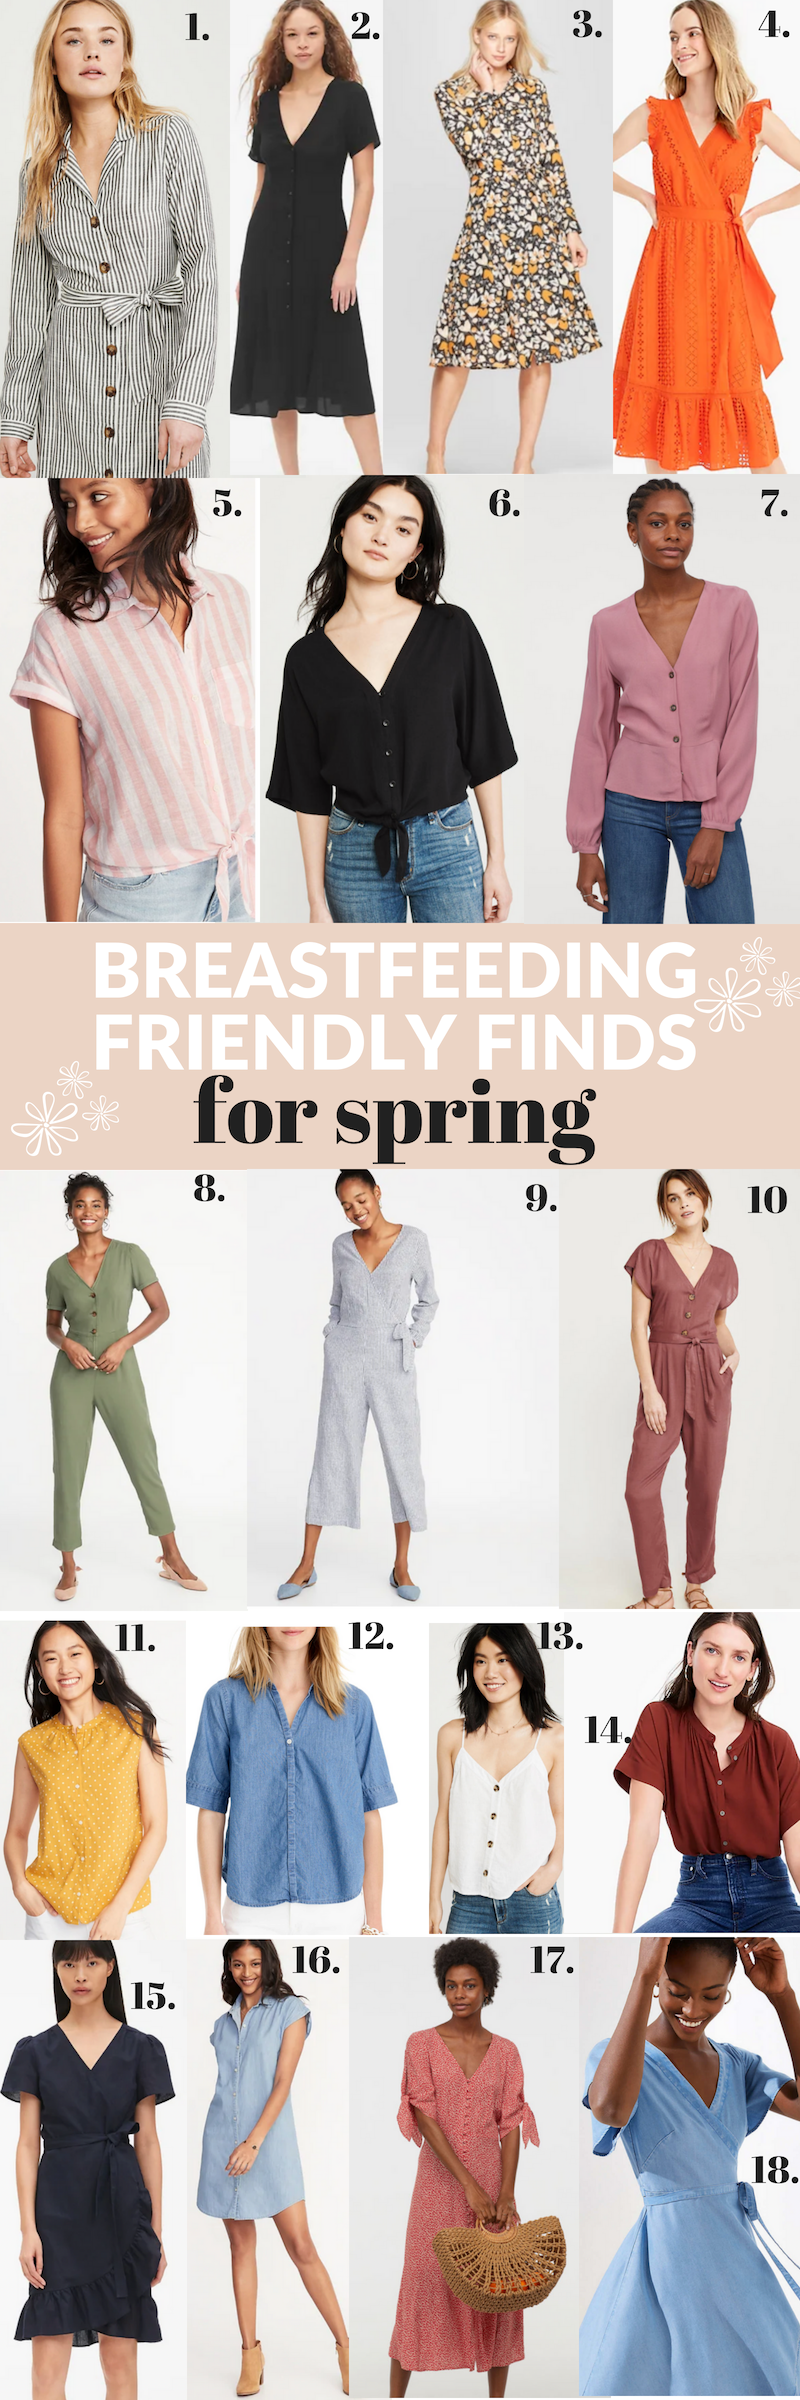 20 Breastfeeding Friendly Finds For Spring - The Mama Notes